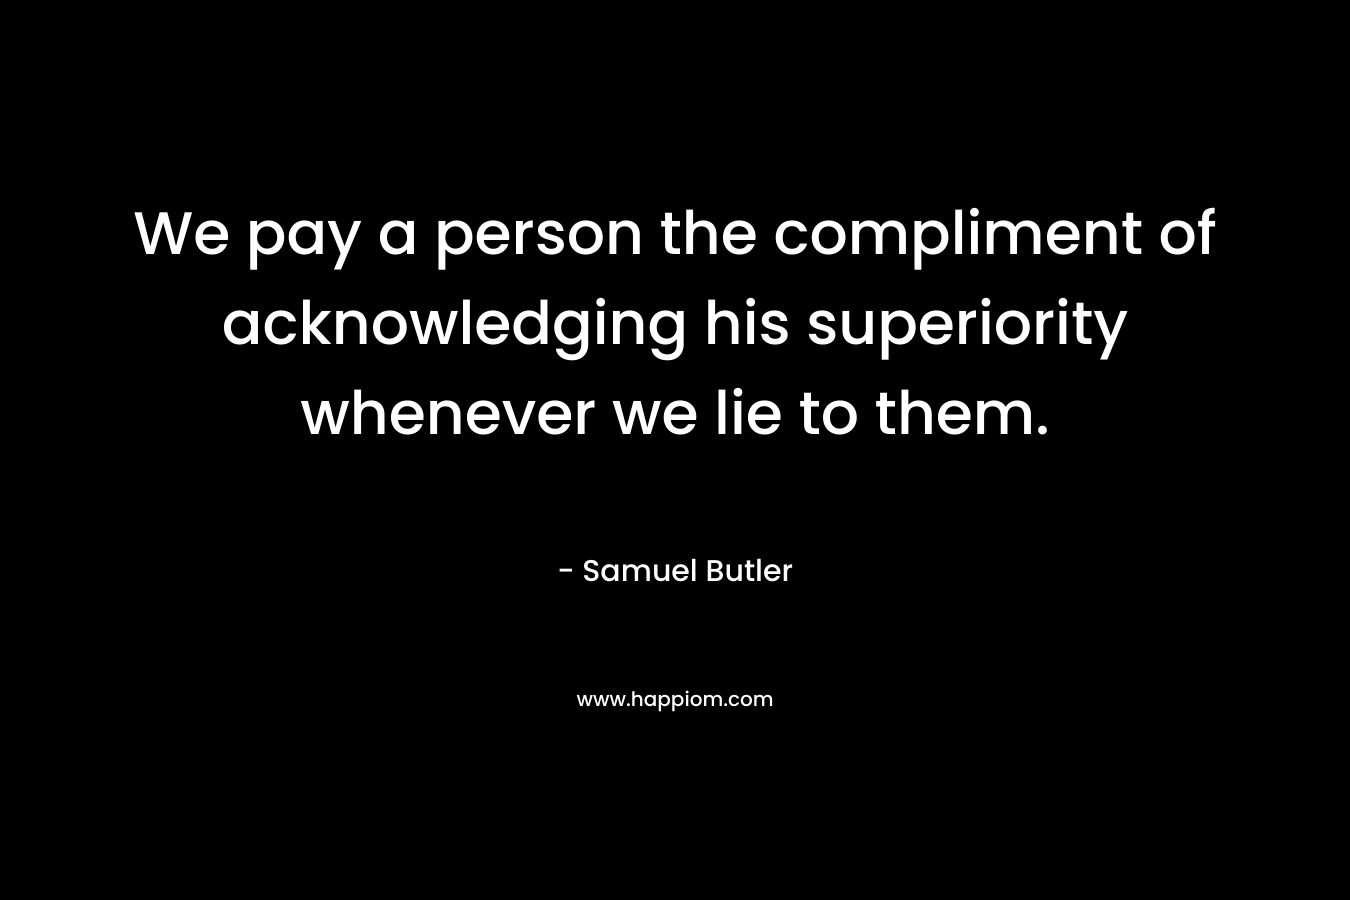 We pay a person the compliment of acknowledging his superiority whenever we lie to them.